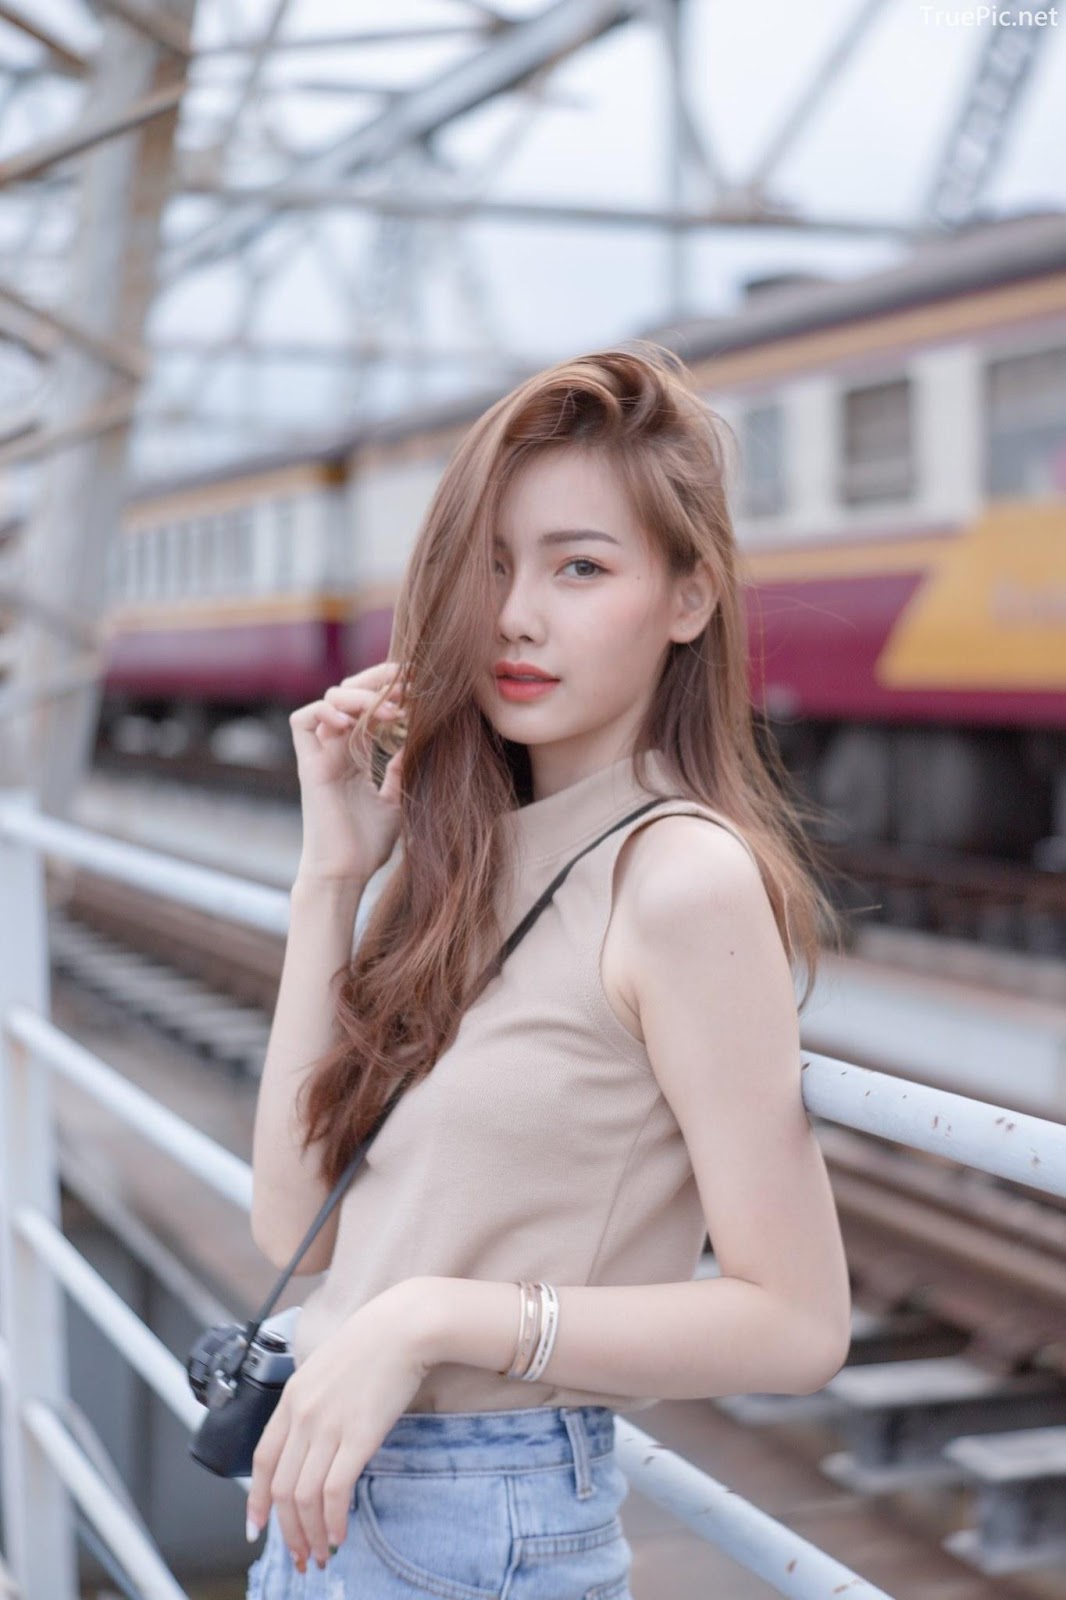 Thailand beautiful model - Pla Kewalin Udomaksorn - A beautiful morning with a cute girl - Picture 21